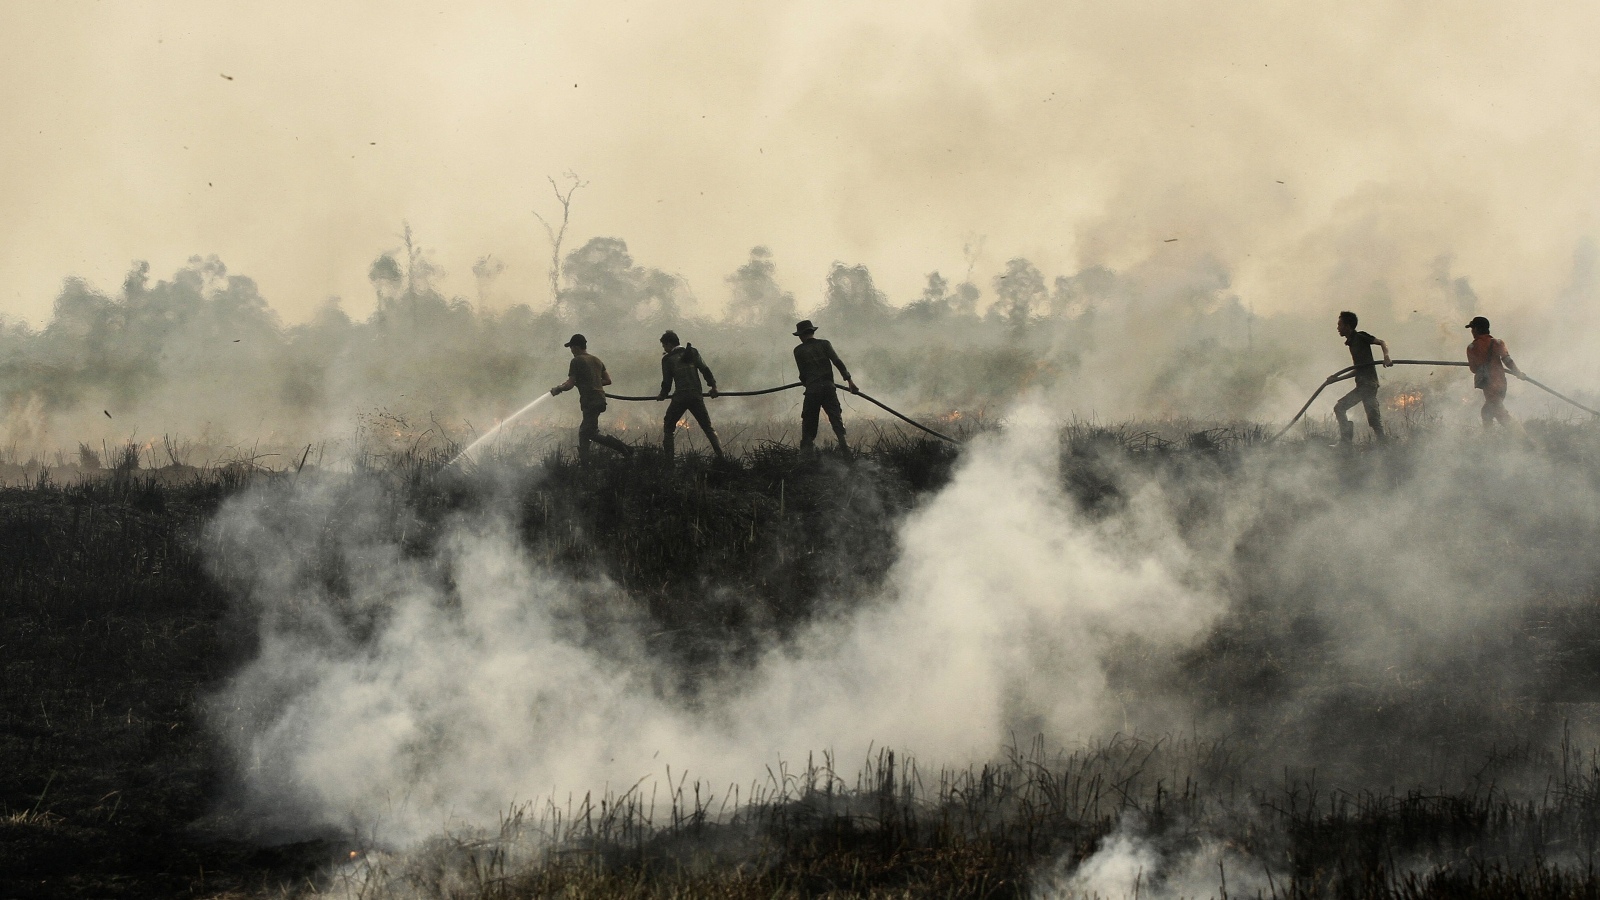 photo of people putting out a fire in a grassy, smoky field